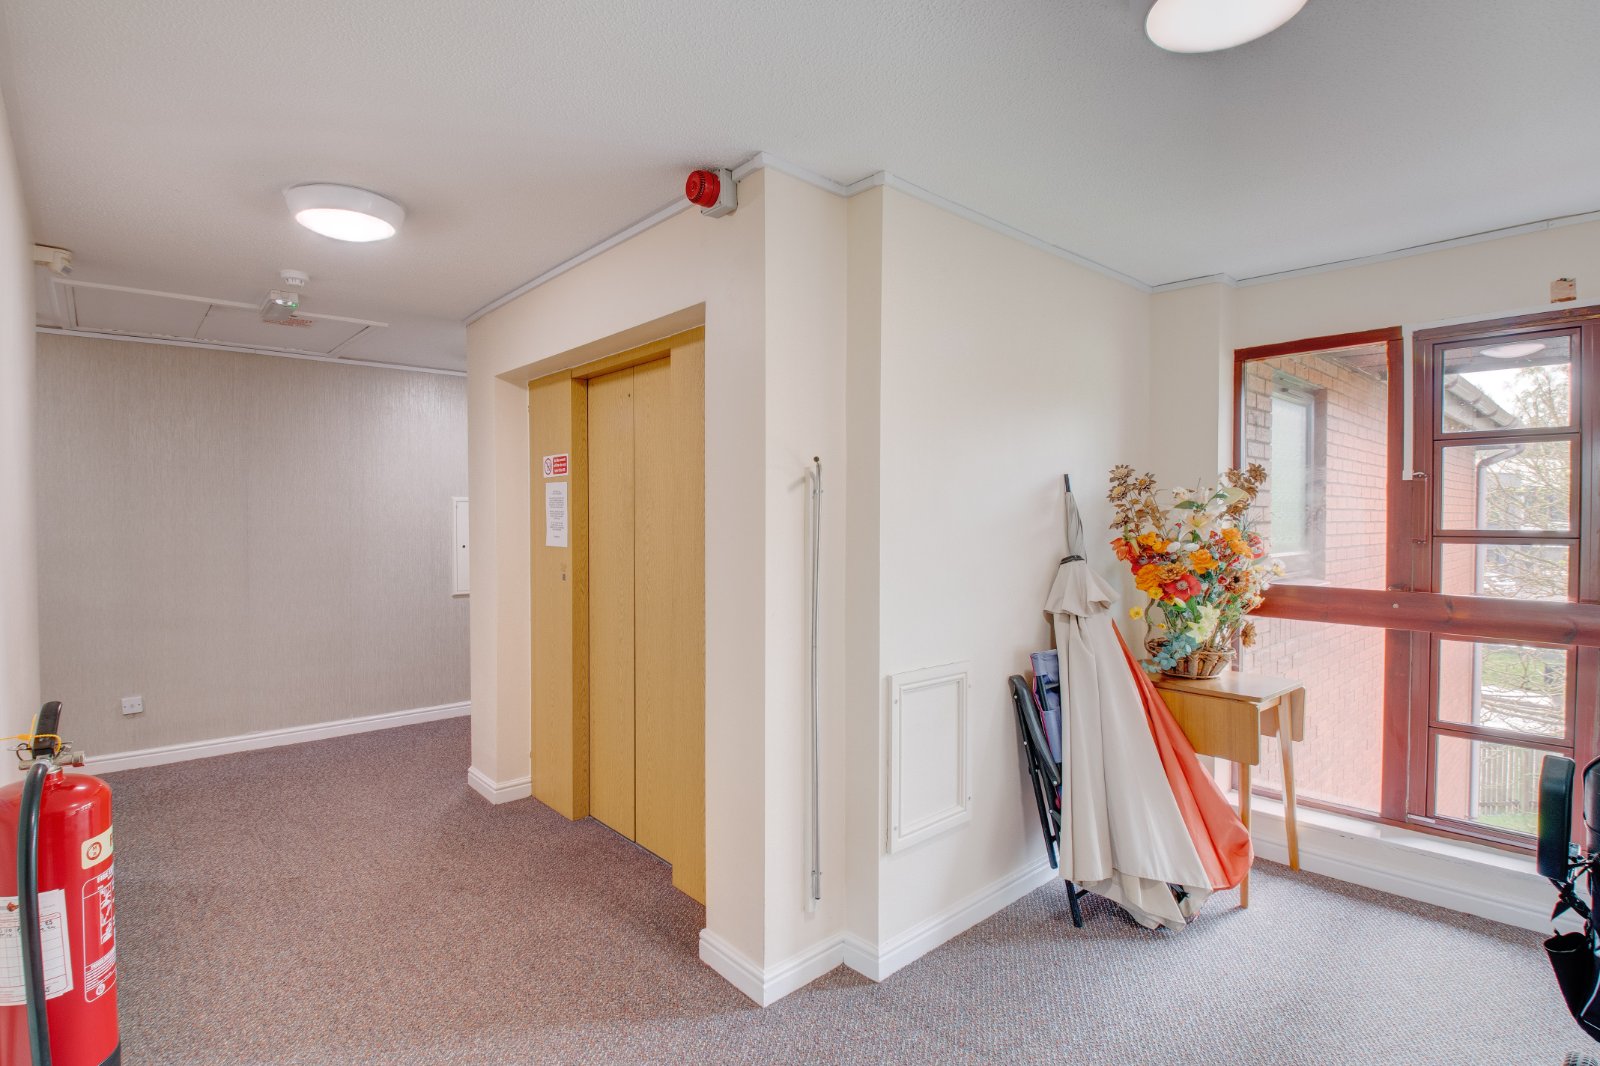 1 bed  for sale in Housman Park, Bromsgrove 9